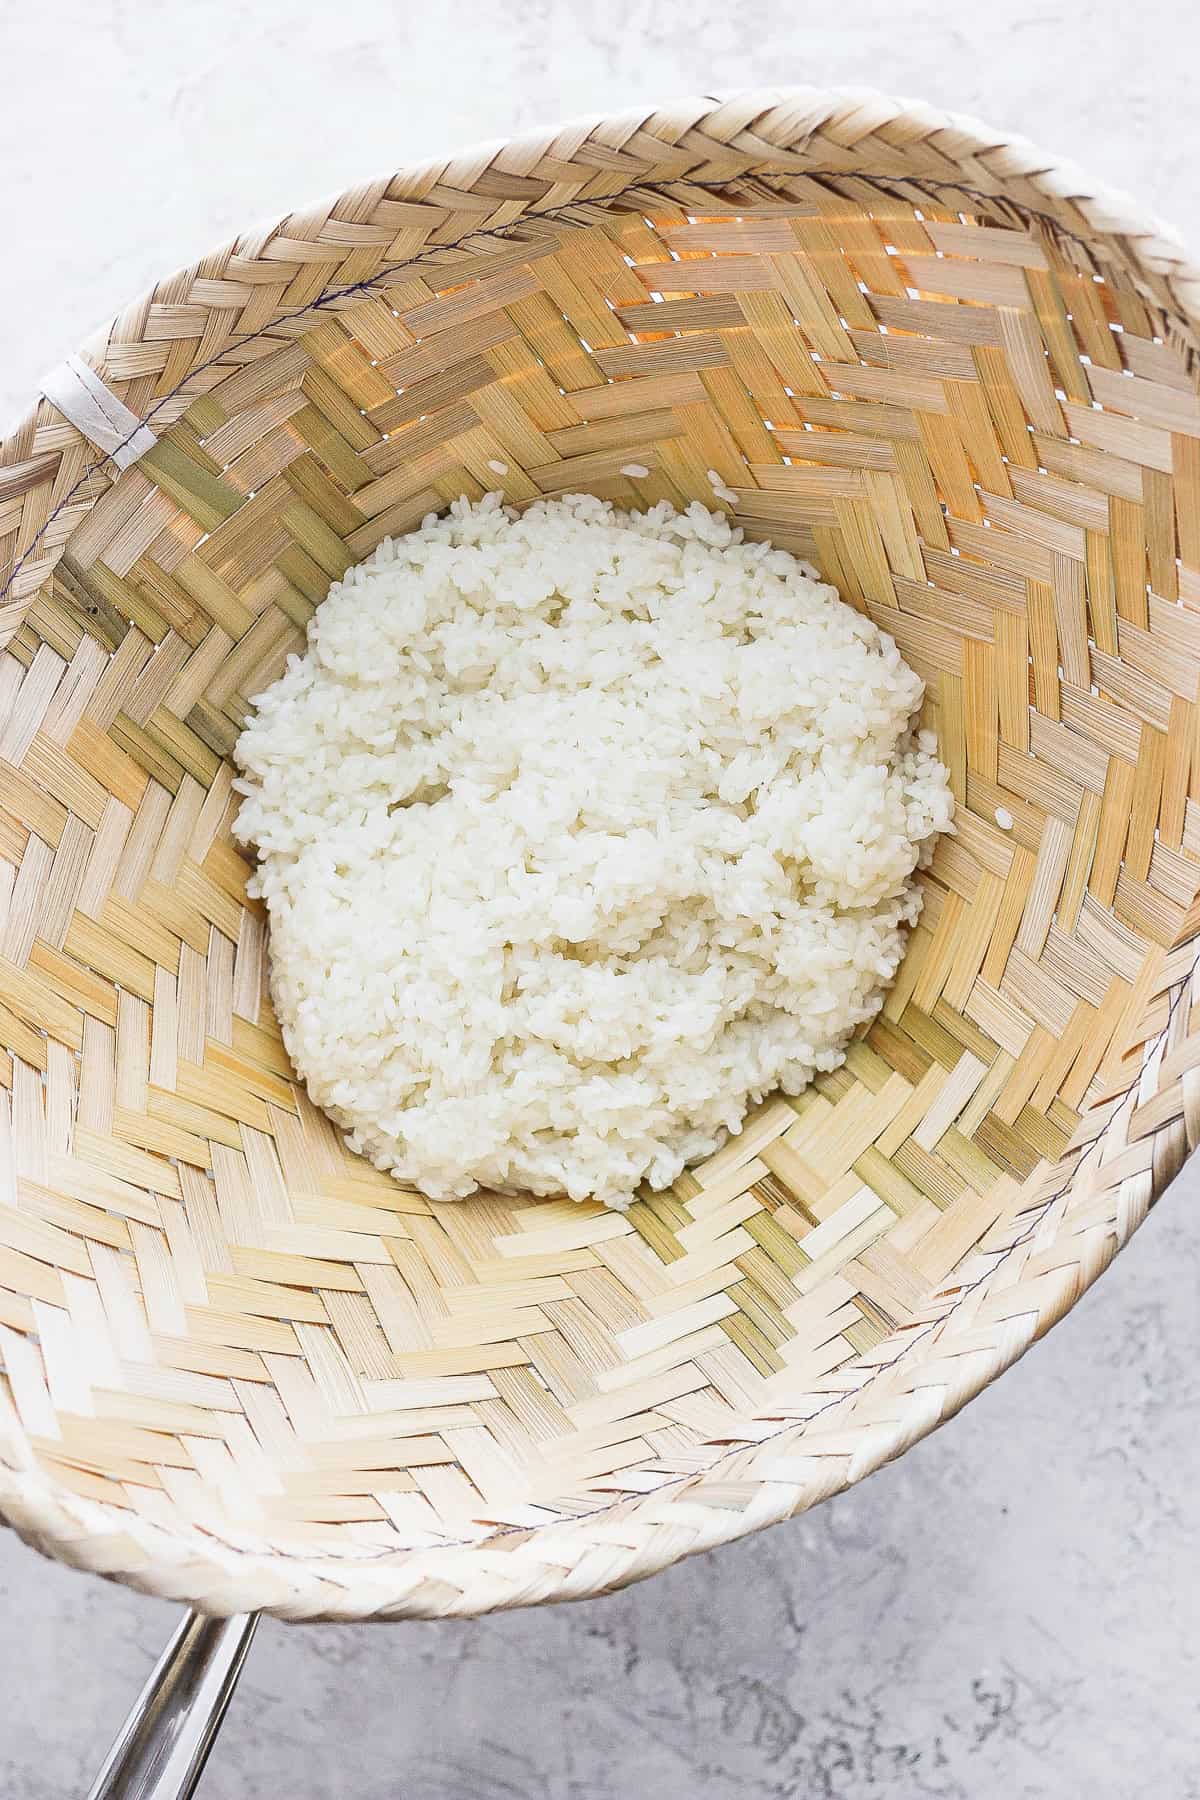 https://fitfoodiefinds.com/wp-content/uploads/2022/01/Sticky-Rice-09.jpg